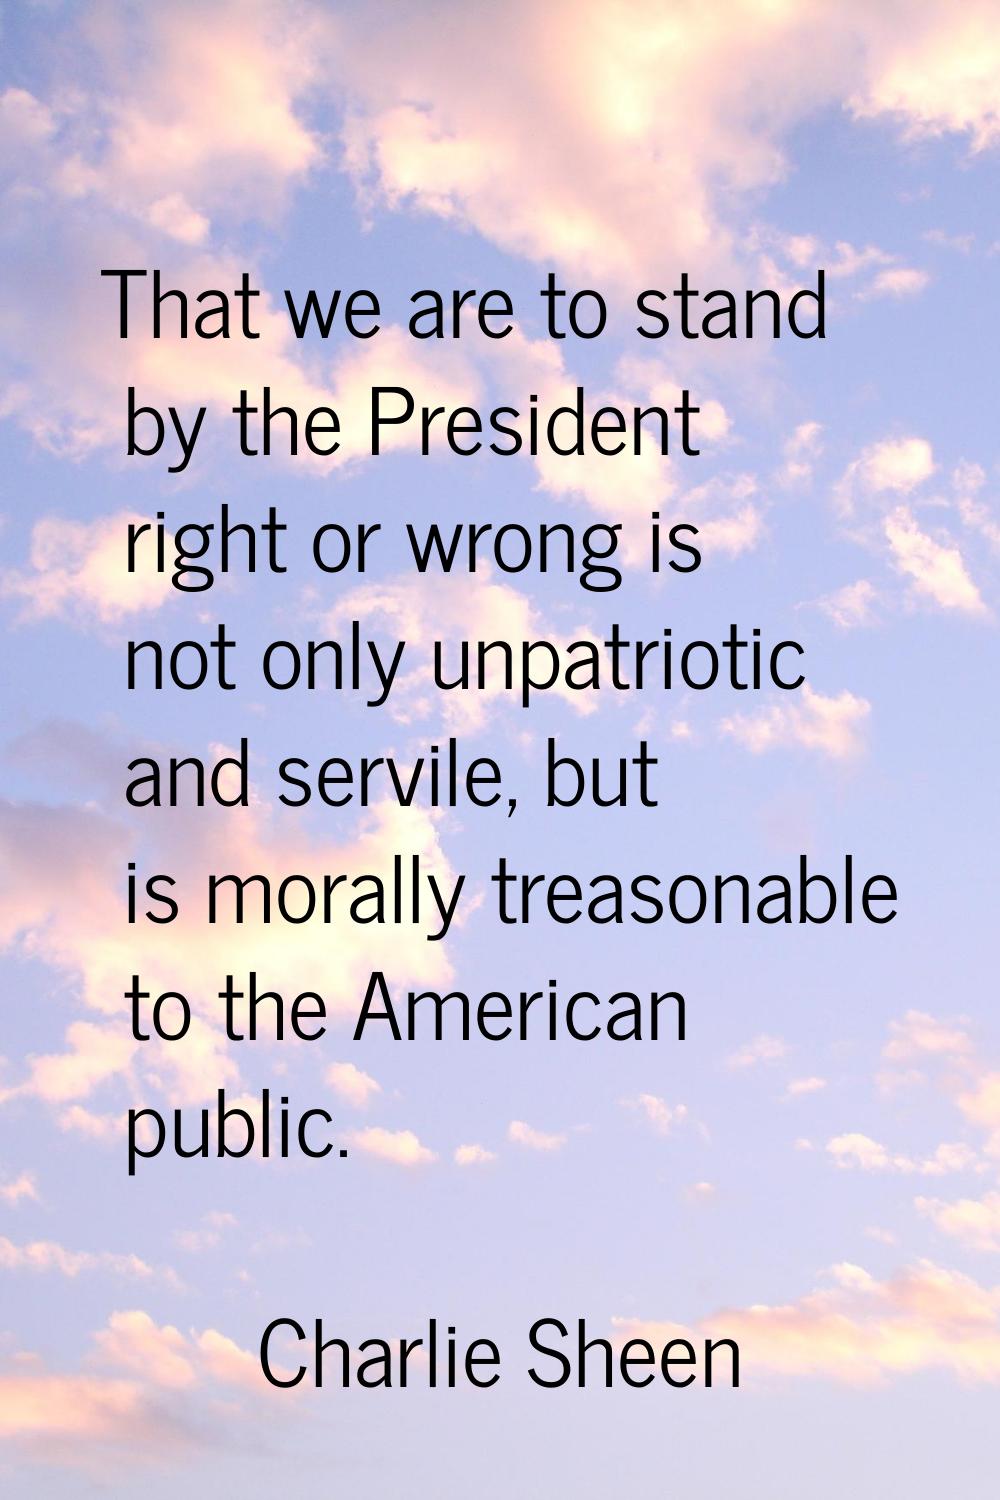 That we are to stand by the President right or wrong is not only unpatriotic and servile, but is mo